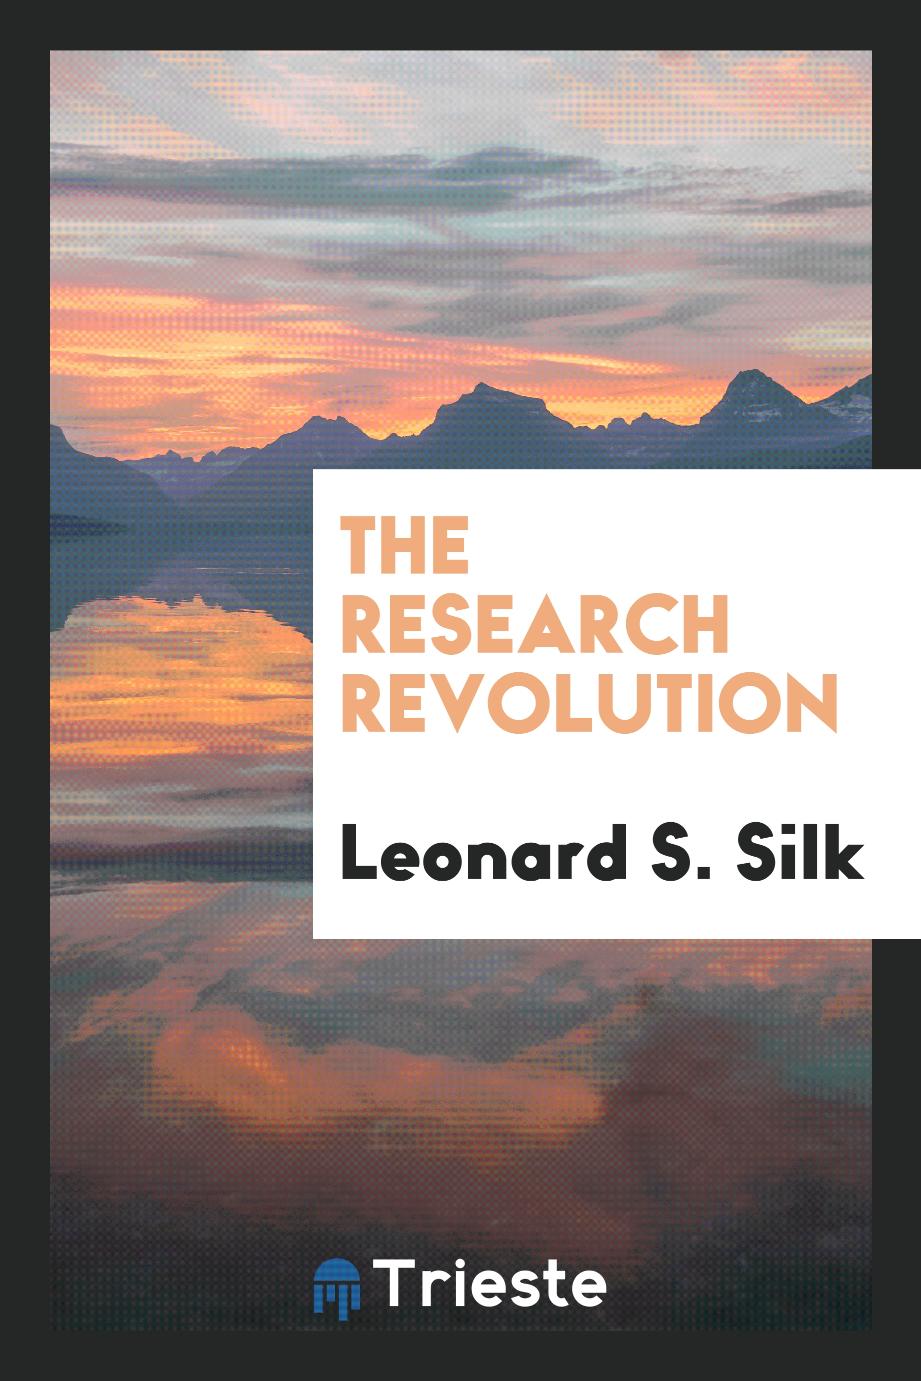 The research revolution